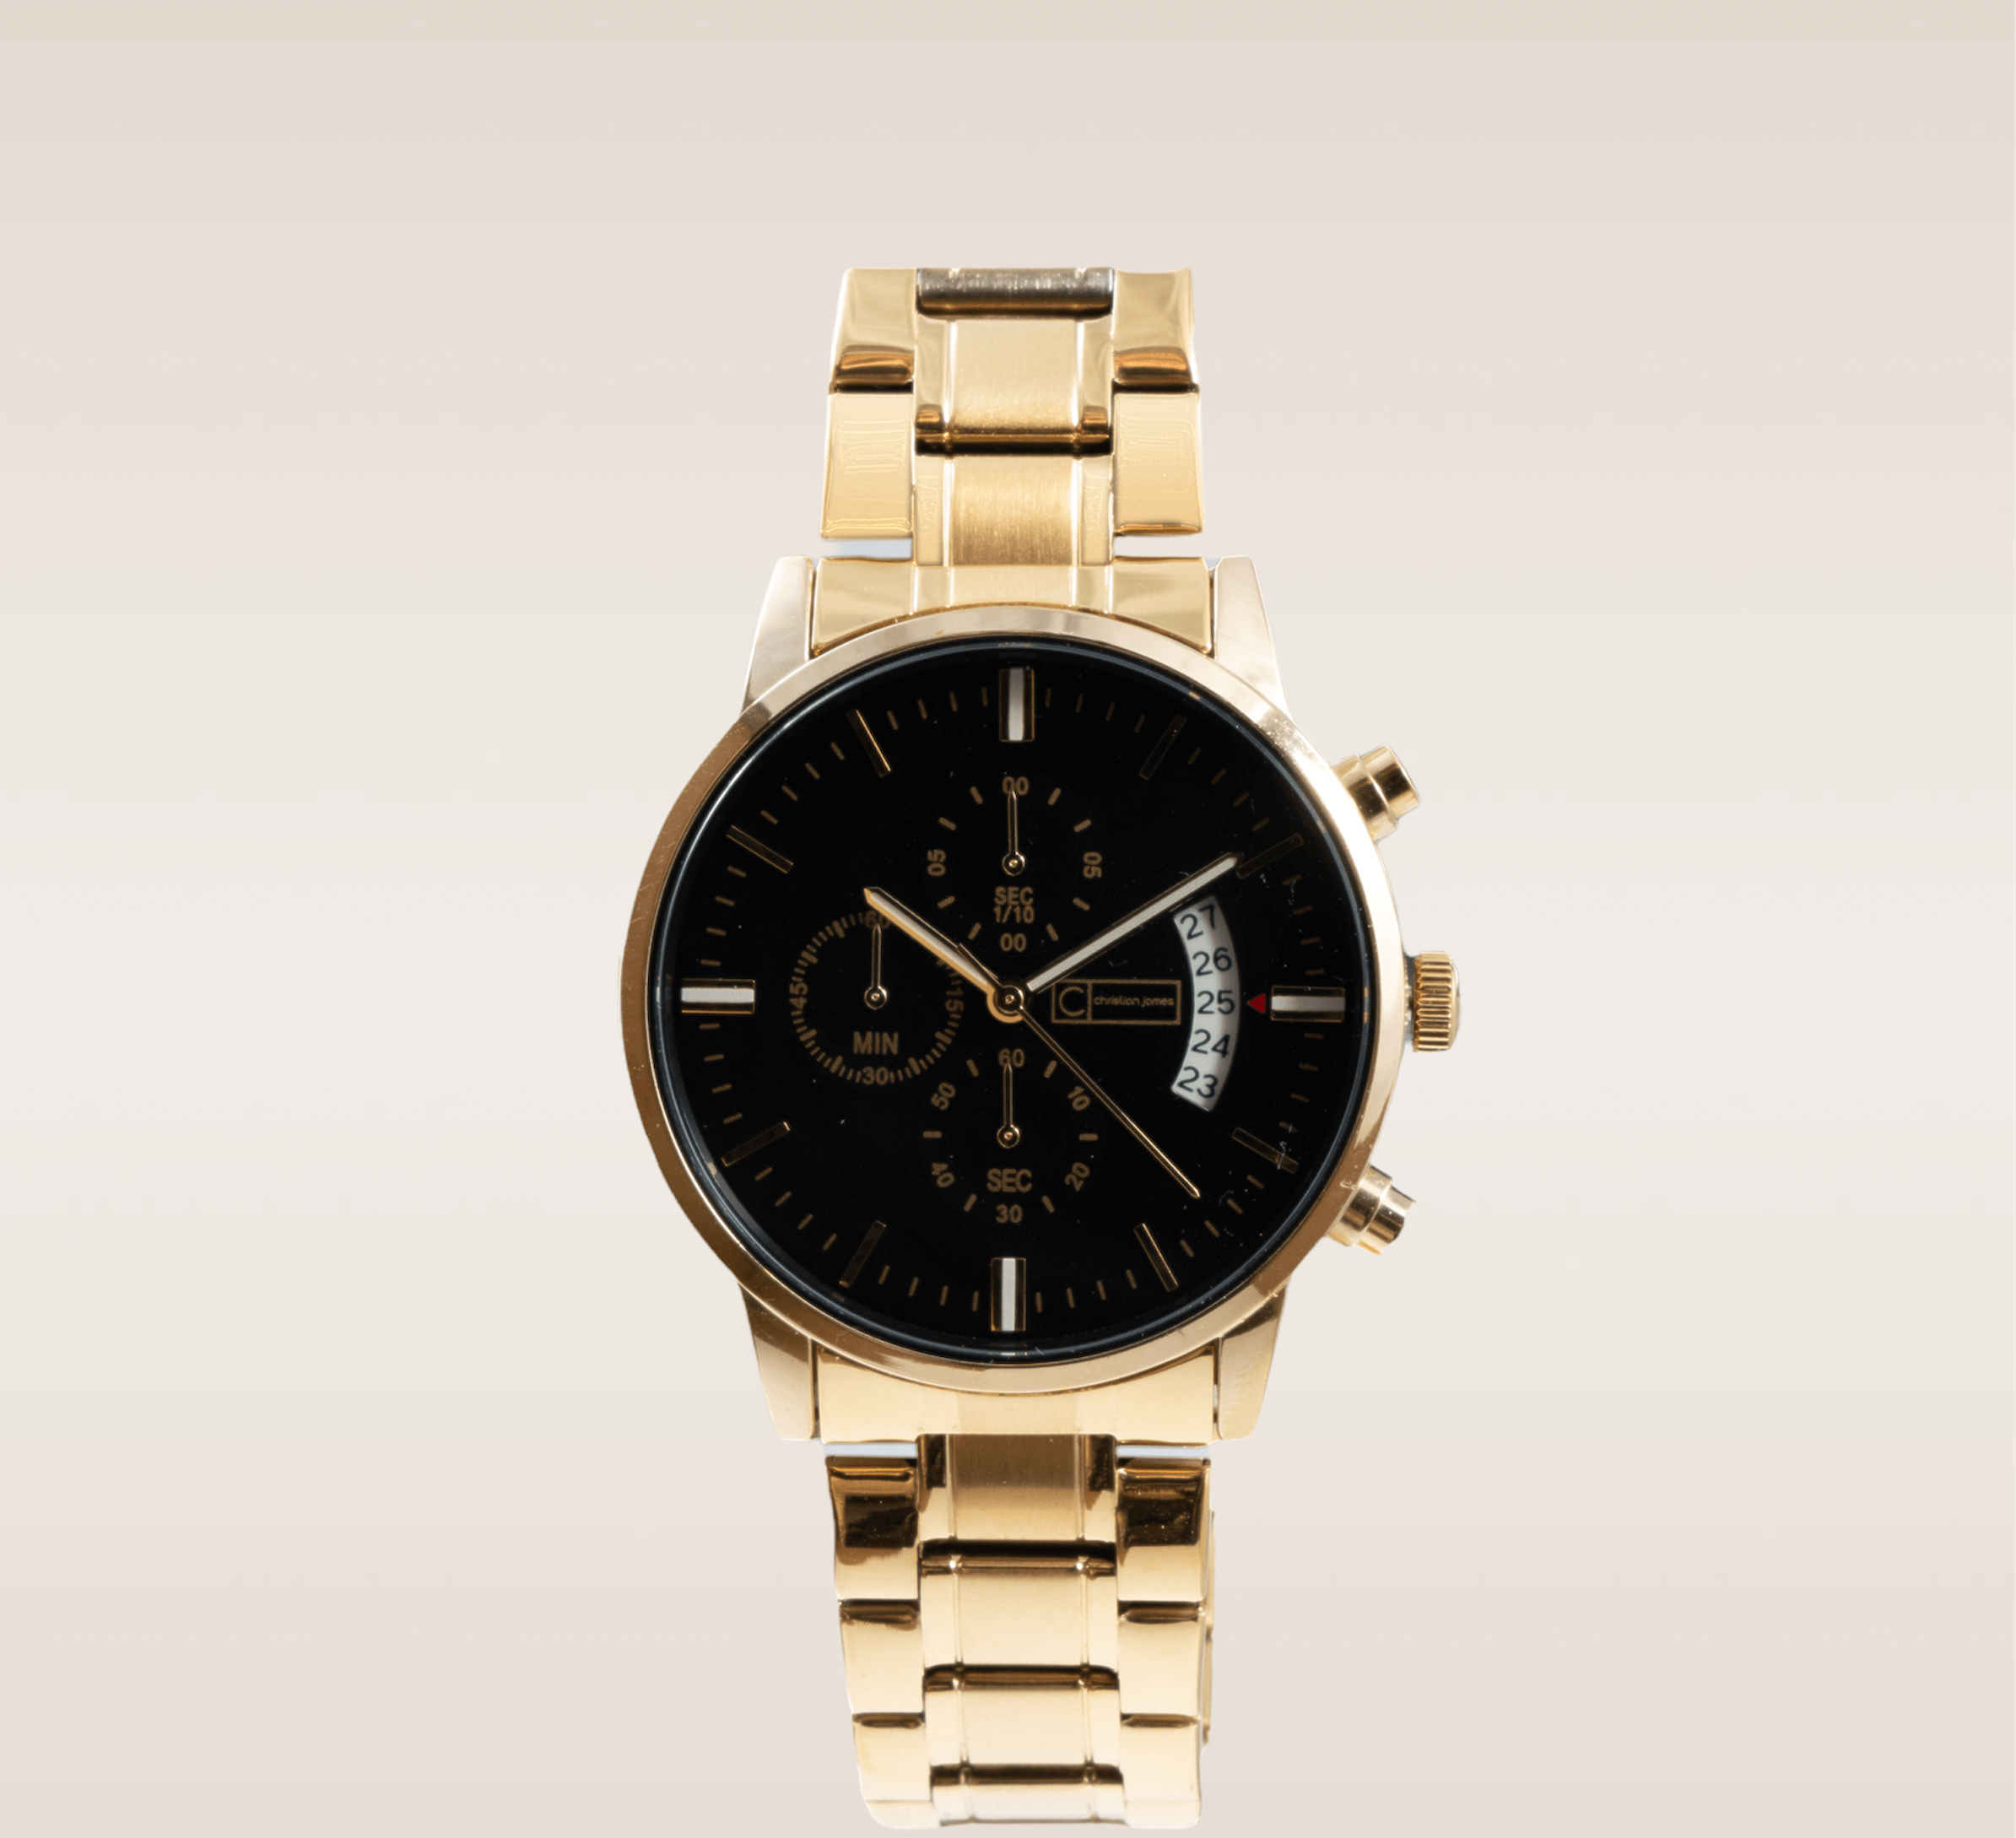 In this up-close shot, we are presented with the captivating Trident Timepiece, a symbol of elegance and precision. The watch features a stunning gold link bracelet that wraps around the wrist, exuding a sense of luxury and sophistication. The deep black watch face provides a striking contrast against the gold, creating a bold and timeless aesthetic. The face is carefully designed with clear and legible markers, allowing for easy time reading. The sleek golden watch hands glide effortlessly across the face, marking the passage of time with grace. 